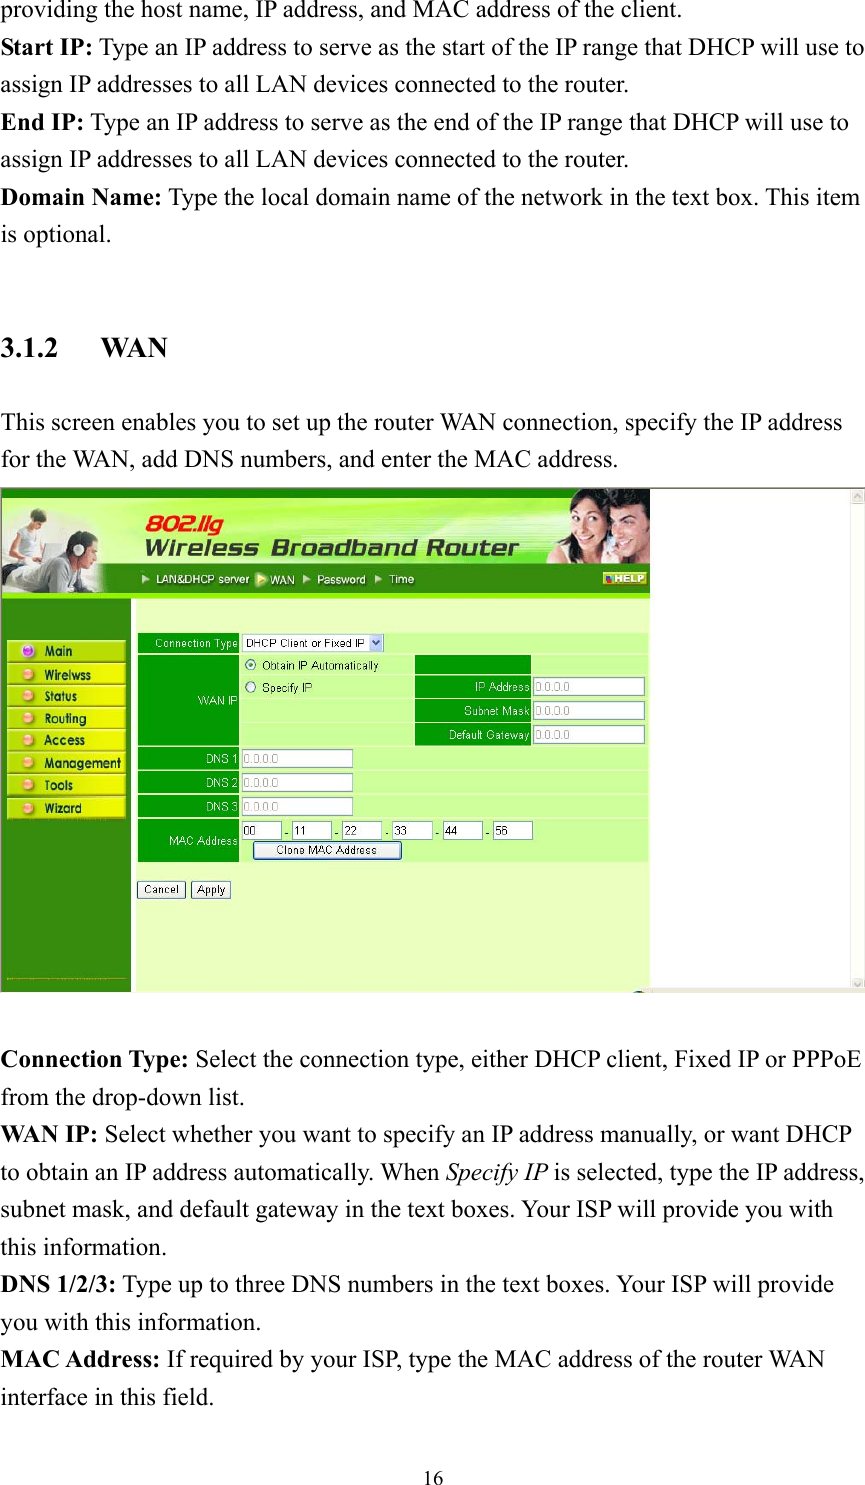  16providing the host name, IP address, and MAC address of the client. Start IP: Type an IP address to serve as the start of the IP range that DHCP will use to assign IP addresses to all LAN devices connected to the router. End IP: Type an IP address to serve as the end of the IP range that DHCP will use to assign IP addresses to all LAN devices connected to the router. Domain Name: Type the local domain name of the network in the text box. This item is optional.  3.1.2 WAN This screen enables you to set up the router WAN connection, specify the IP address for the WAN, add DNS numbers, and enter the MAC address.   Connection Type: Select the connection type, either DHCP client, Fixed IP or PPPoE from the drop-down list. WAN IP: Select whether you want to specify an IP address manually, or want DHCP to obtain an IP address automatically. When Specify IP is selected, type the IP address, subnet mask, and default gateway in the text boxes. Your ISP will provide you with this information. DNS 1/2/3: Type up to three DNS numbers in the text boxes. Your ISP will provide you with this information. MAC Address: If required by your ISP, type the MAC address of the router WAN interface in this field. 